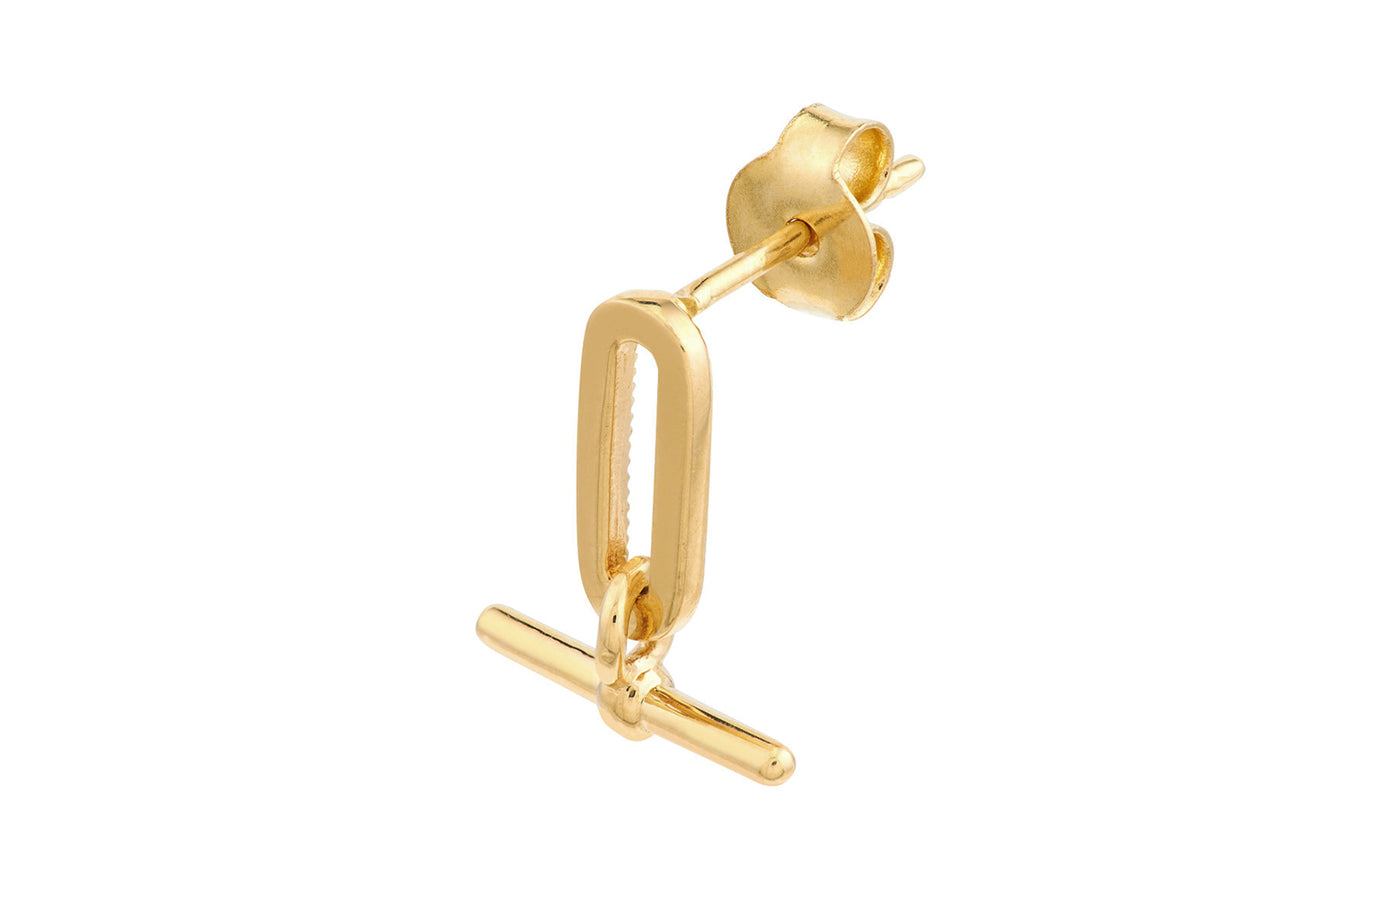 Paperclip T-bar Earrings in Yellow Gold